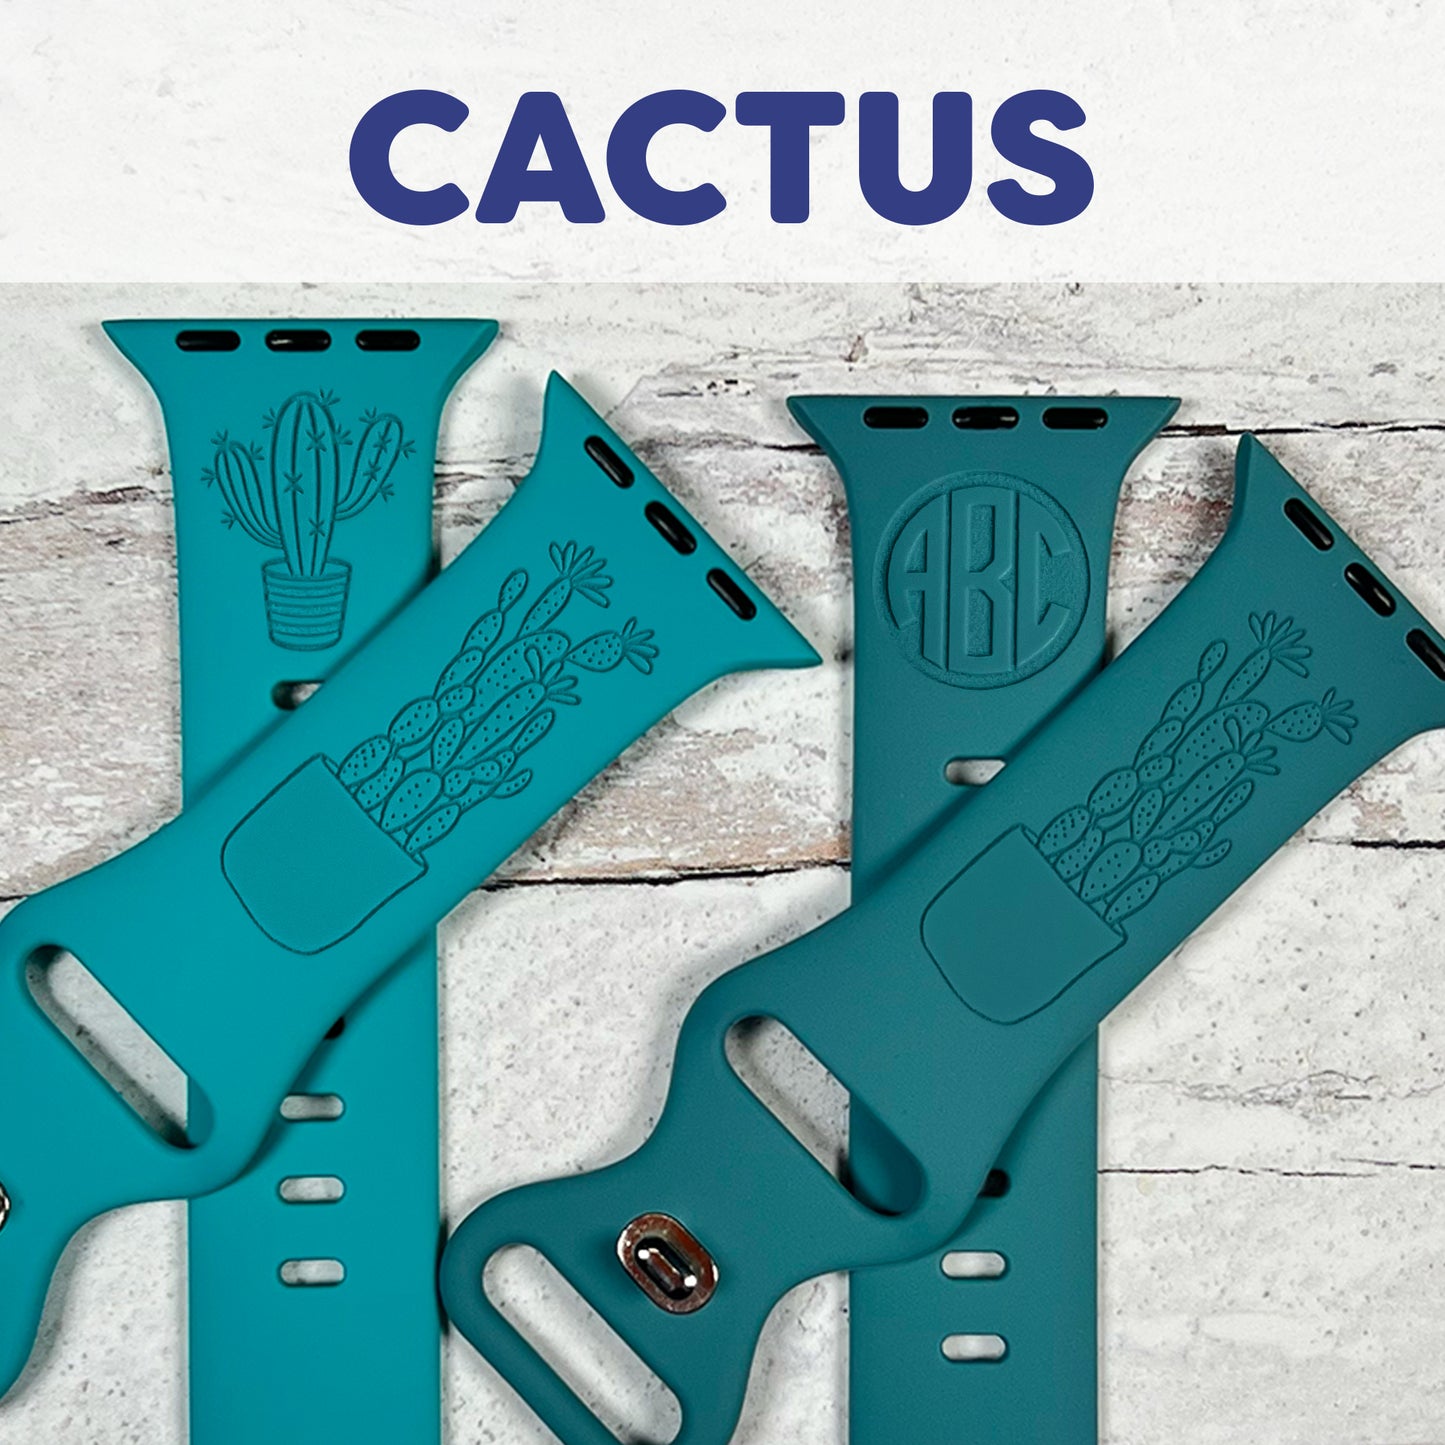 CACTUS - Engraved watchband